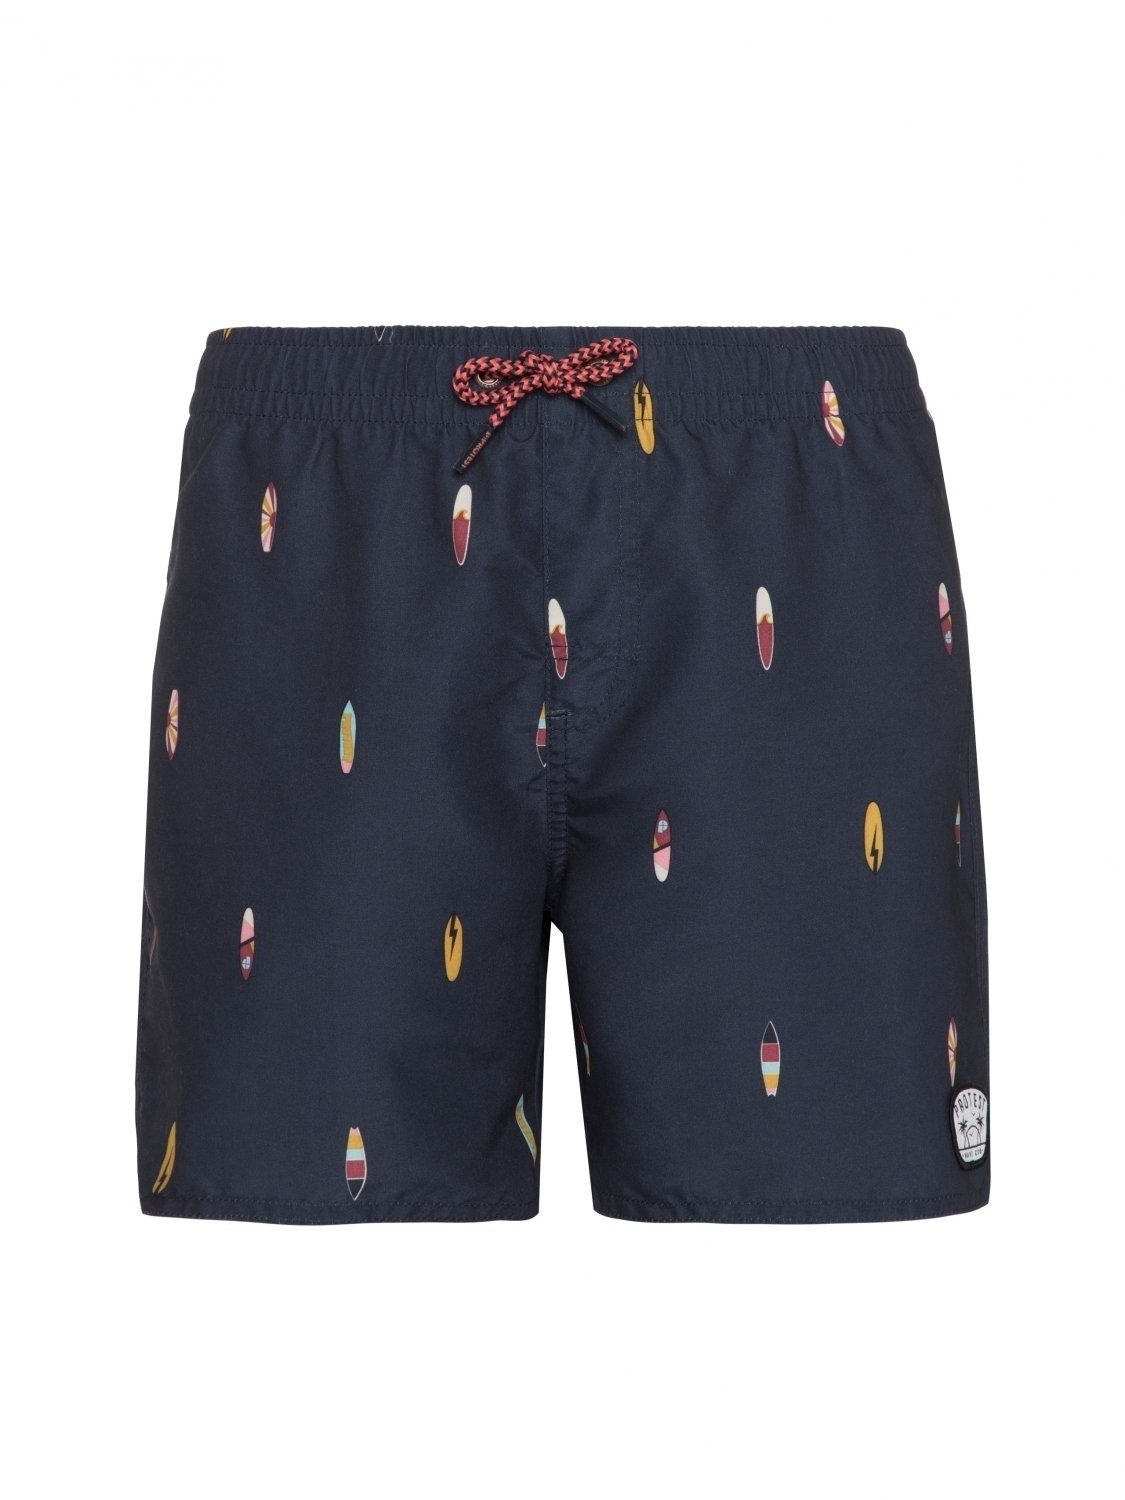 Protest Badeshorts Protest Prttyko Jungen Badehose